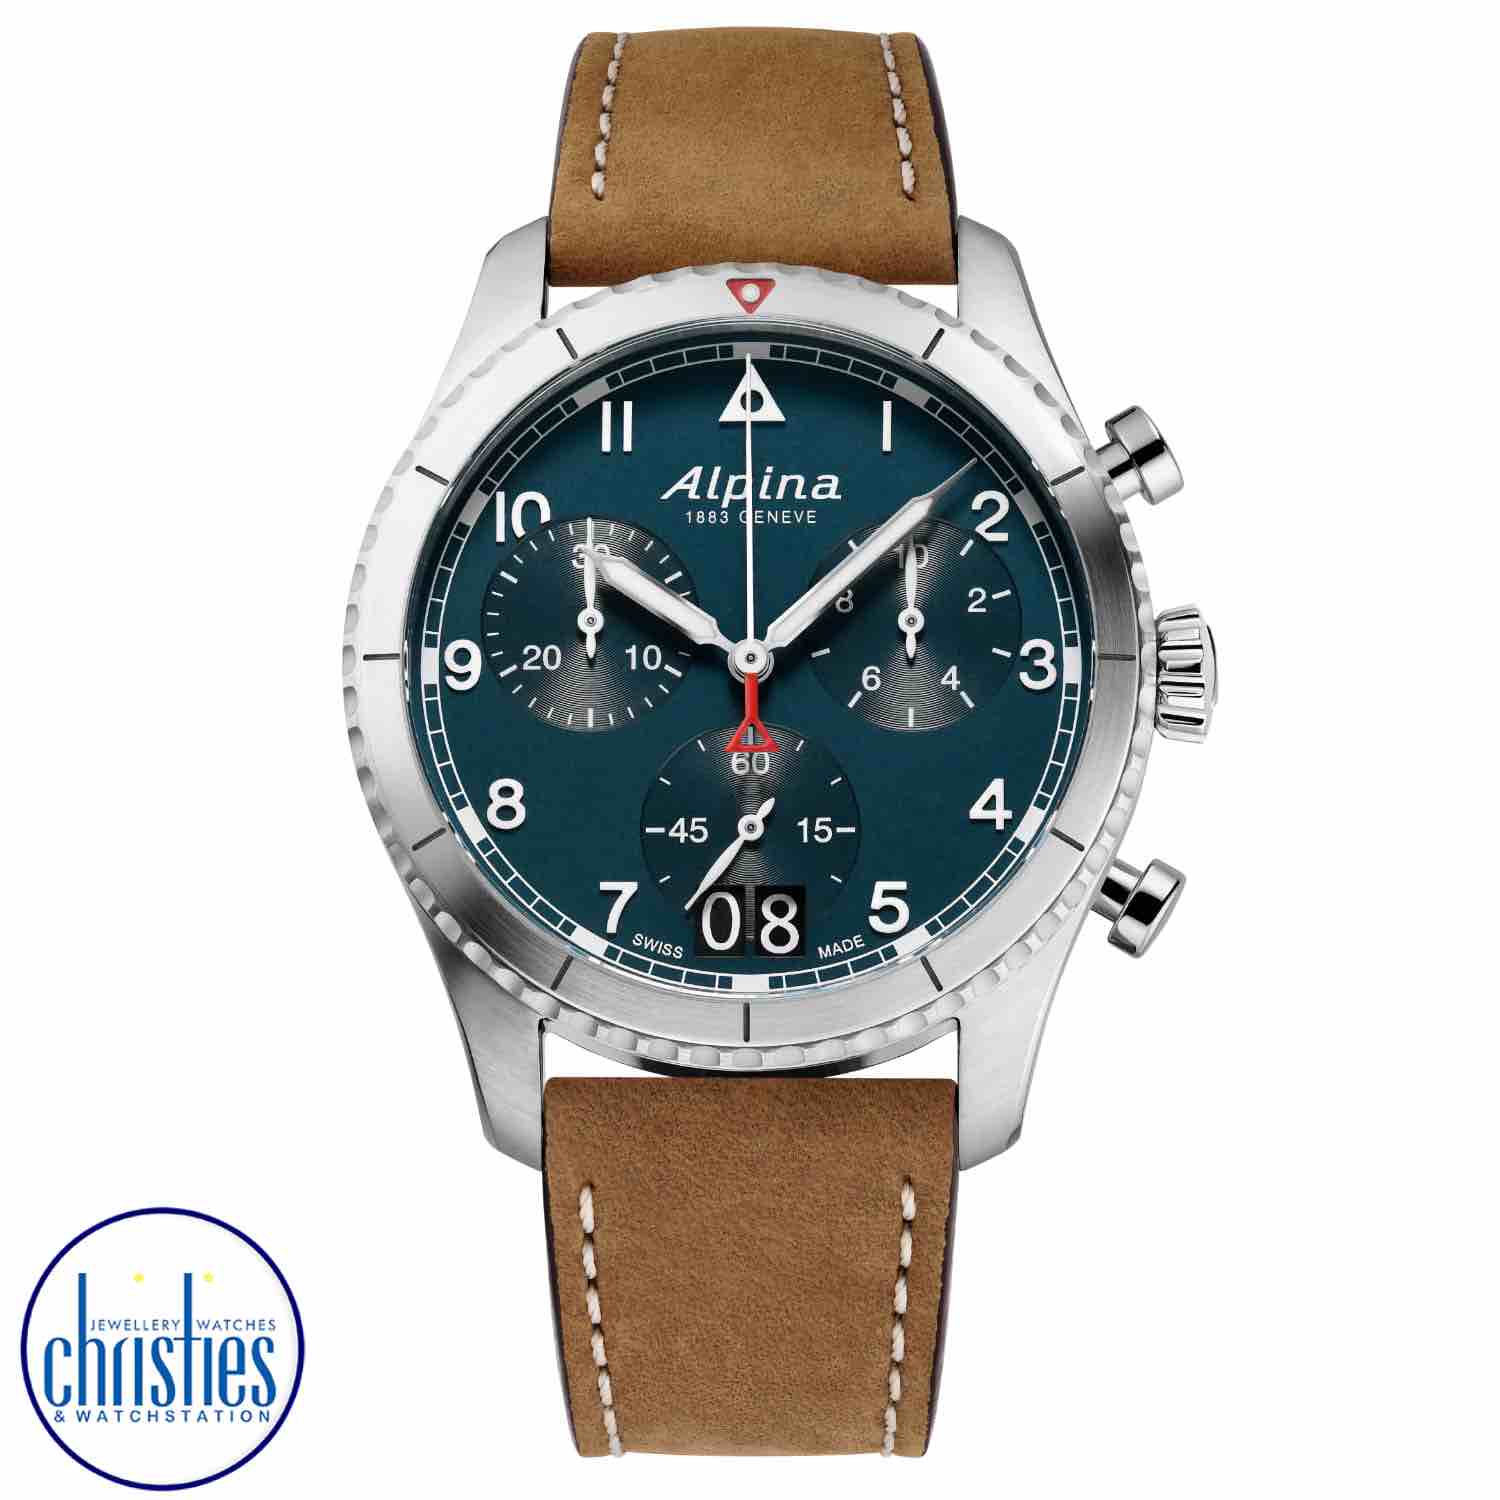 Alpina Startimer Pilot Quartz Chronograph Big Date  Petroleum Blue AL-372NW4S26. From the very beginning, as far back as 1883, Alpina has been associated with horological innovation.